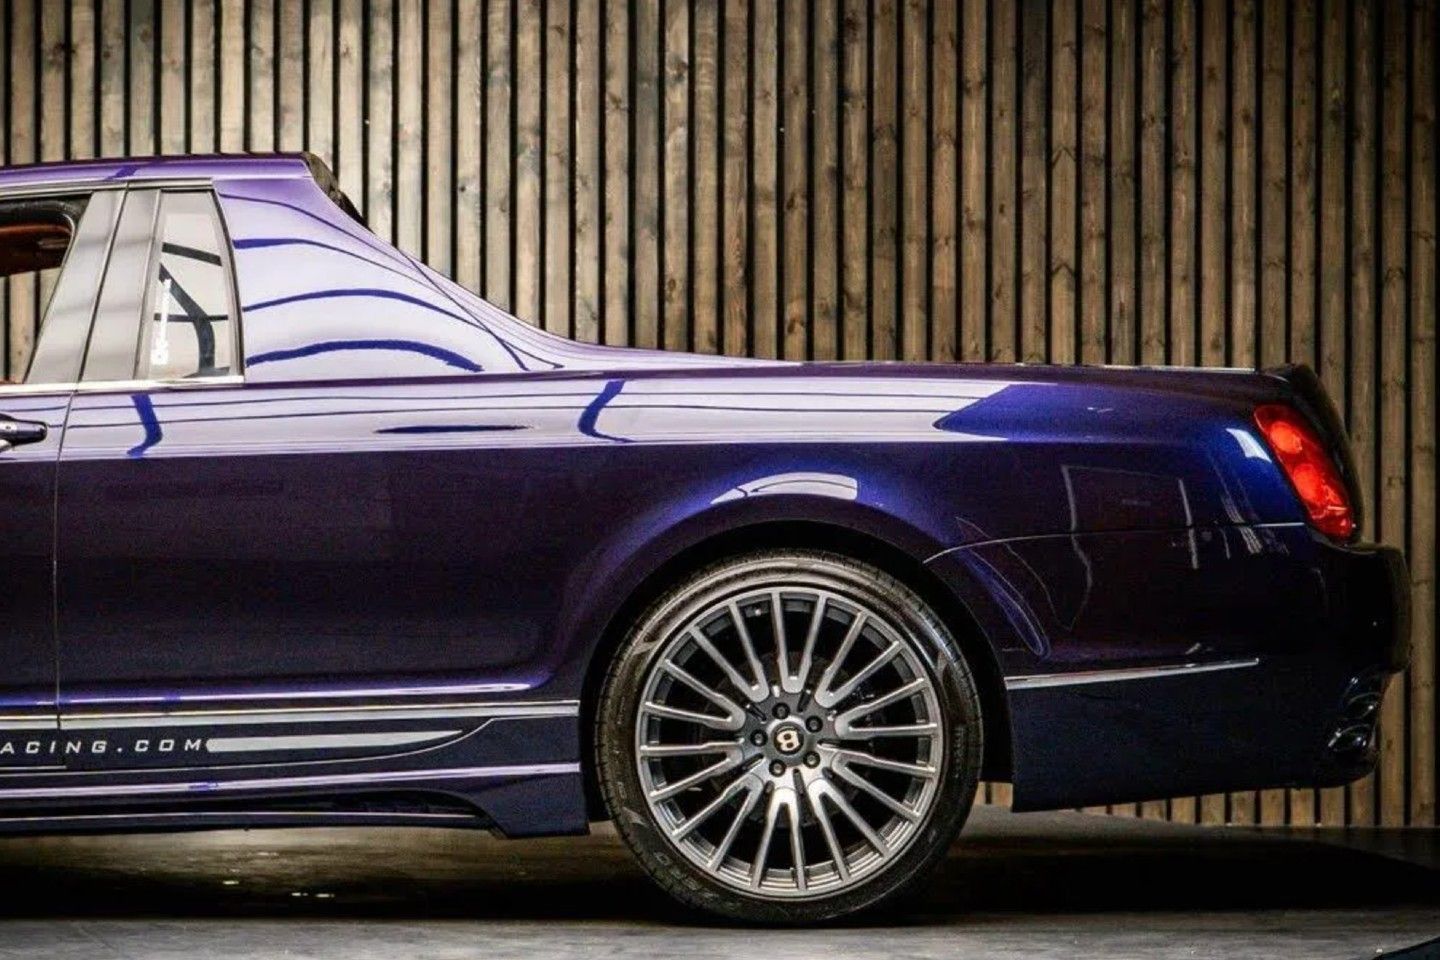 Meet 'Decadence,' the $215,000 Bentley Flying Spur turned pickup